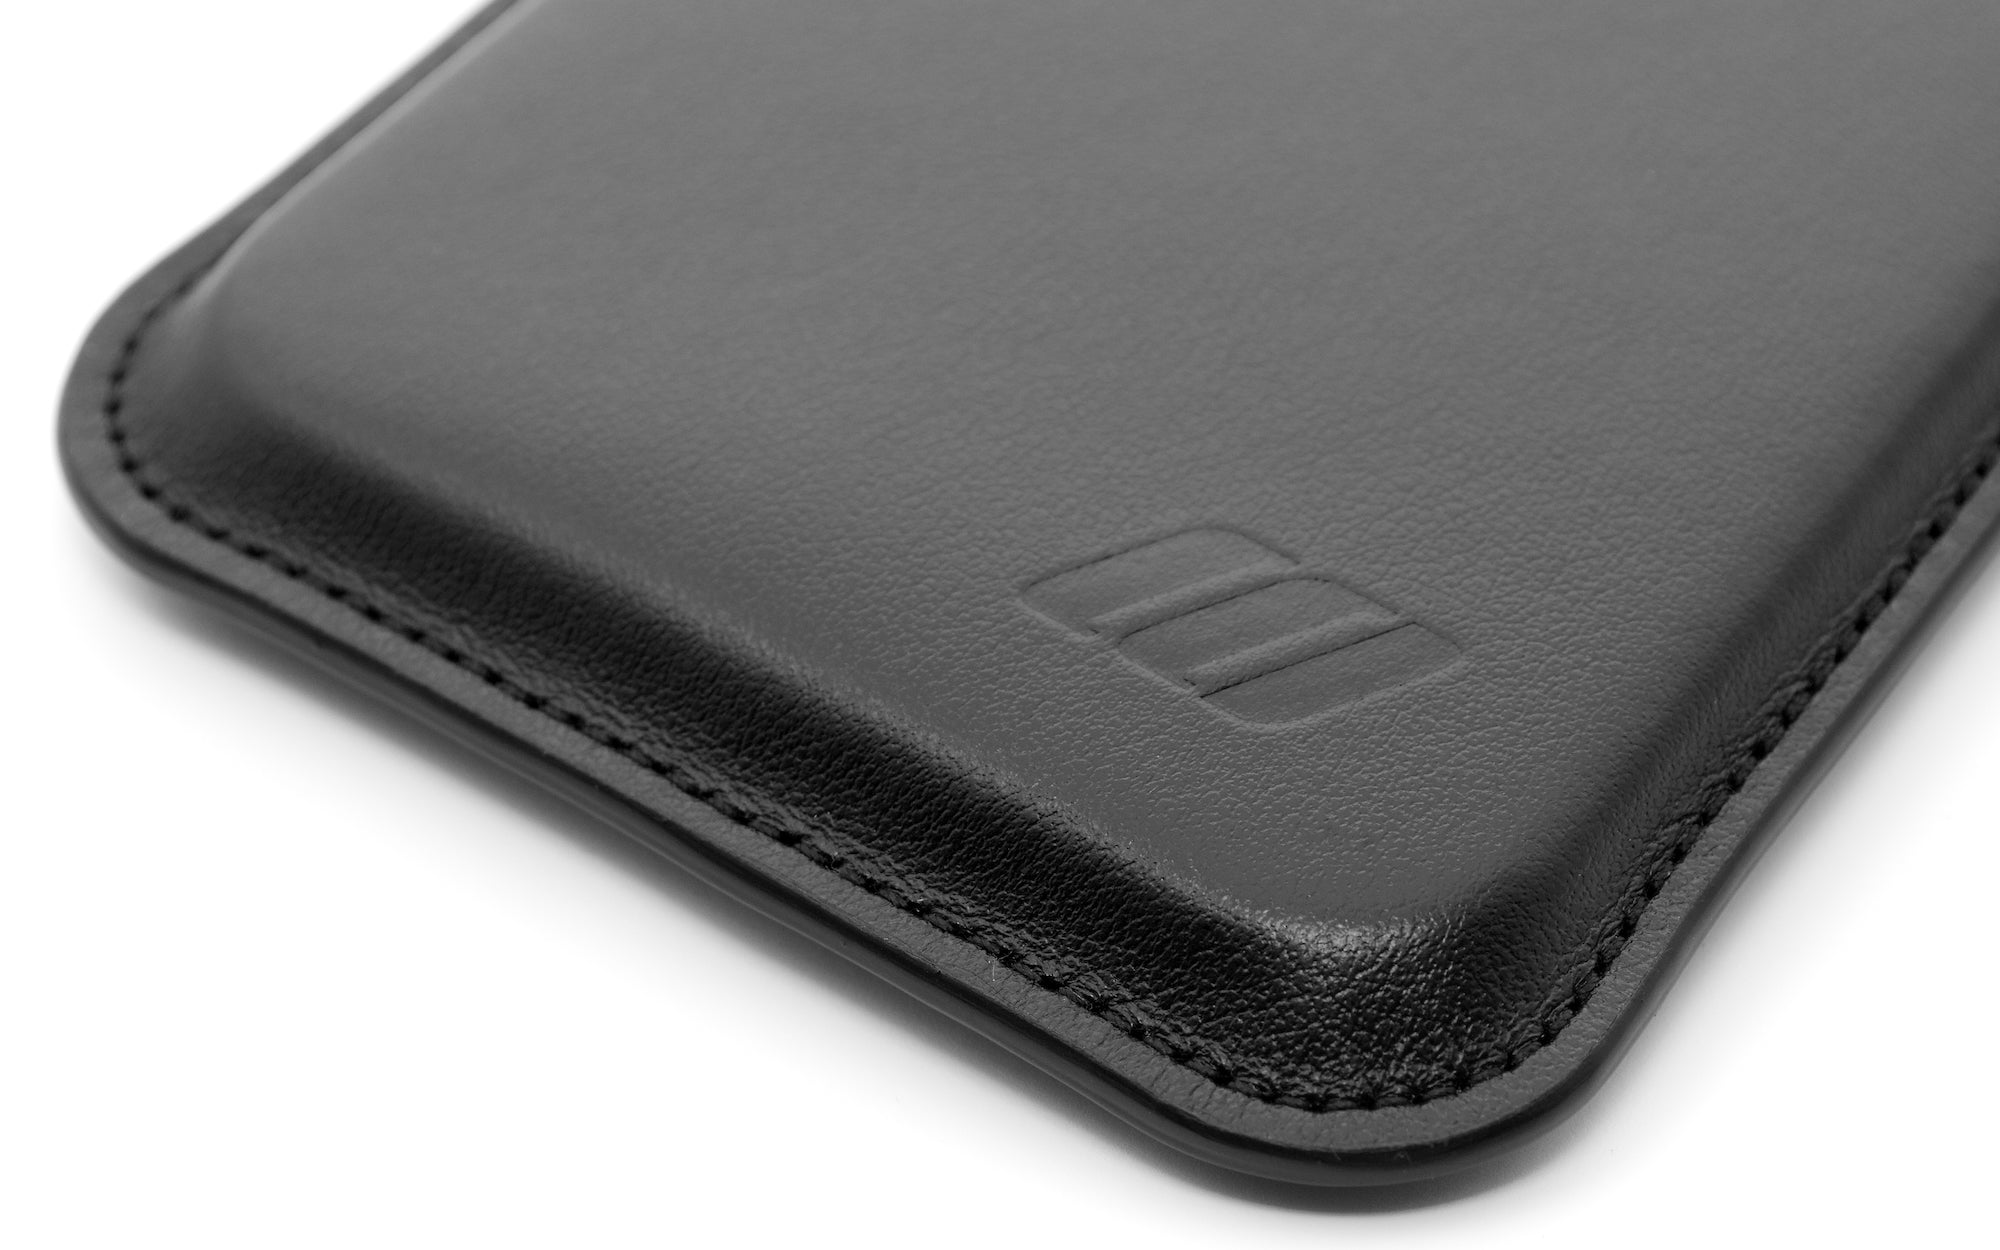 iPhone 12 Pro Leather Case Pouch - Skinny Fit - Black